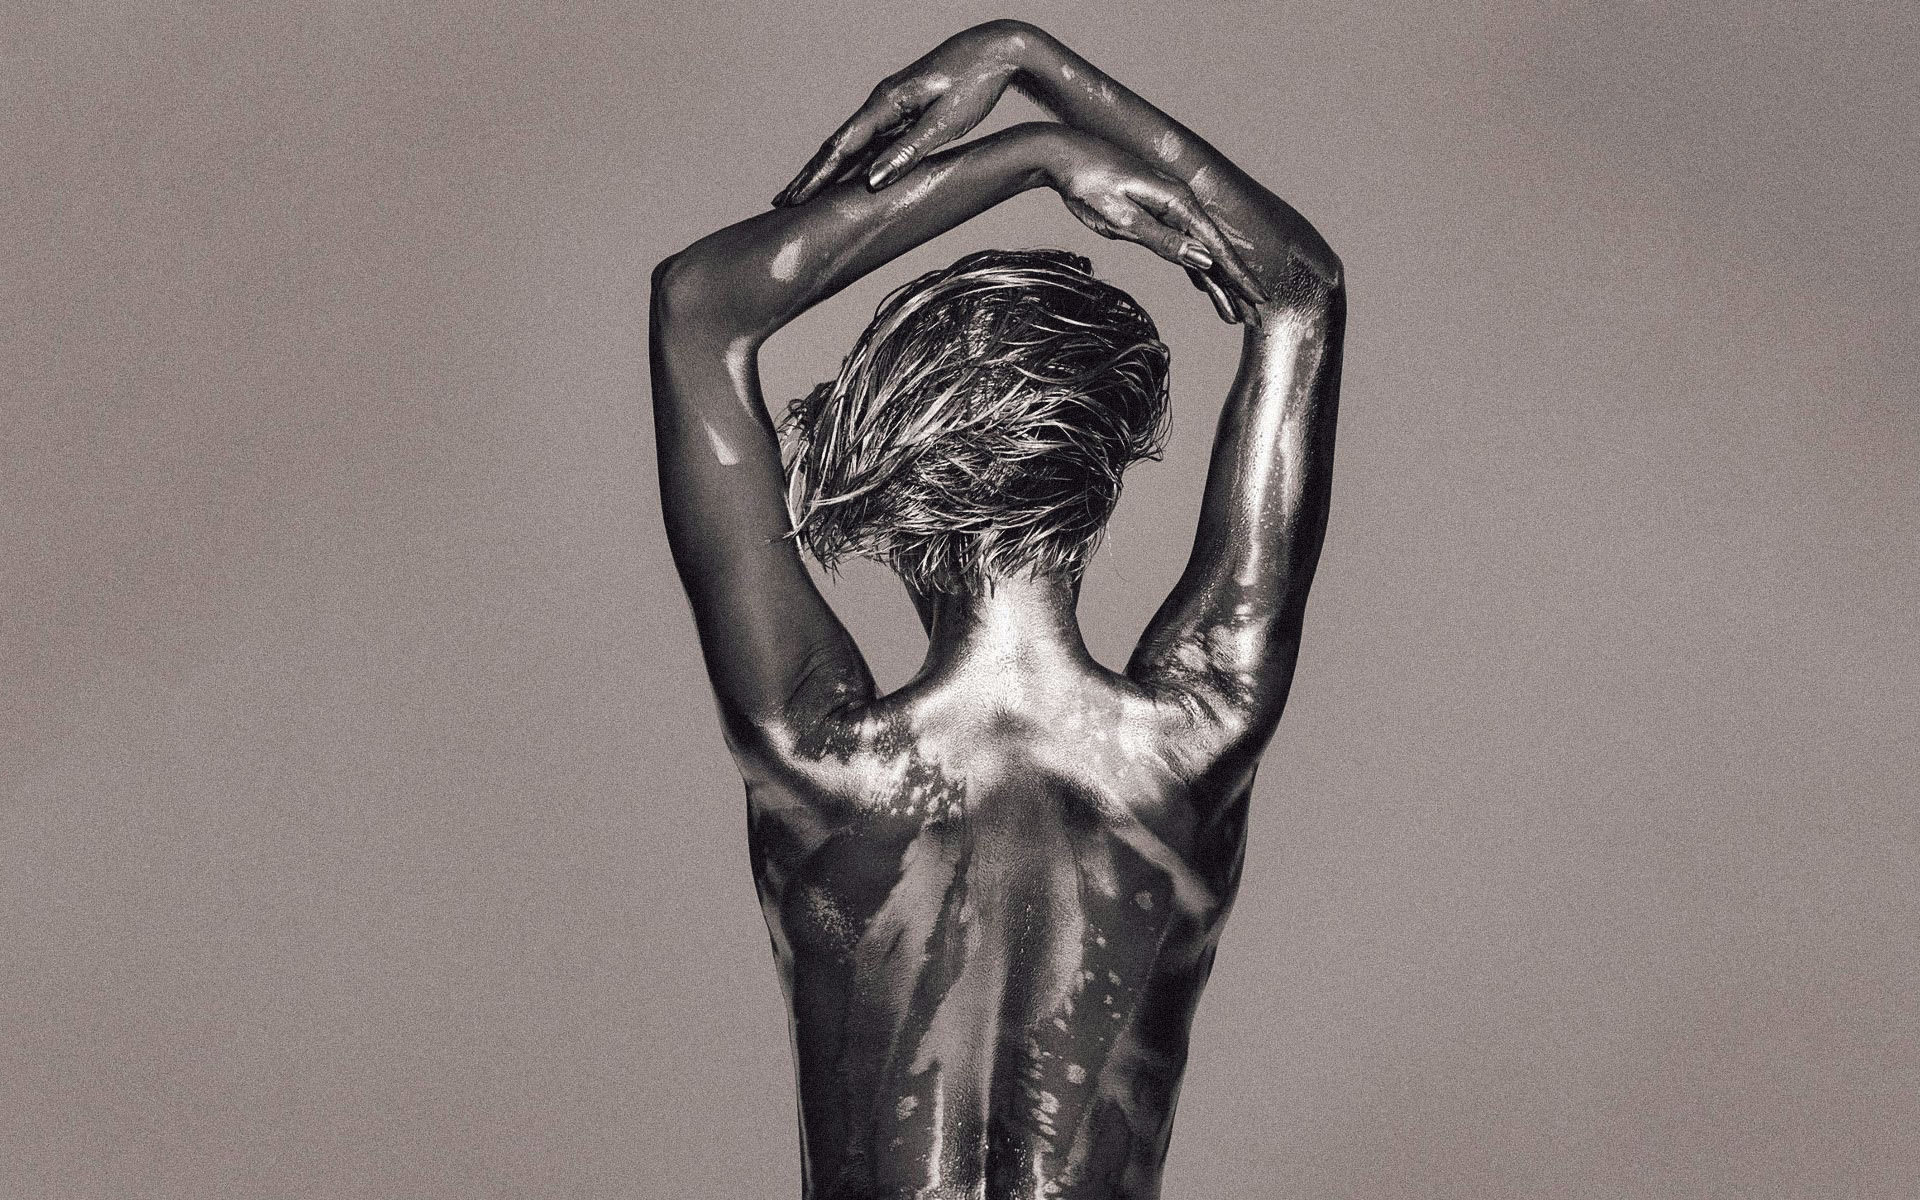 Guido Argentini's Silver Series | Filthy